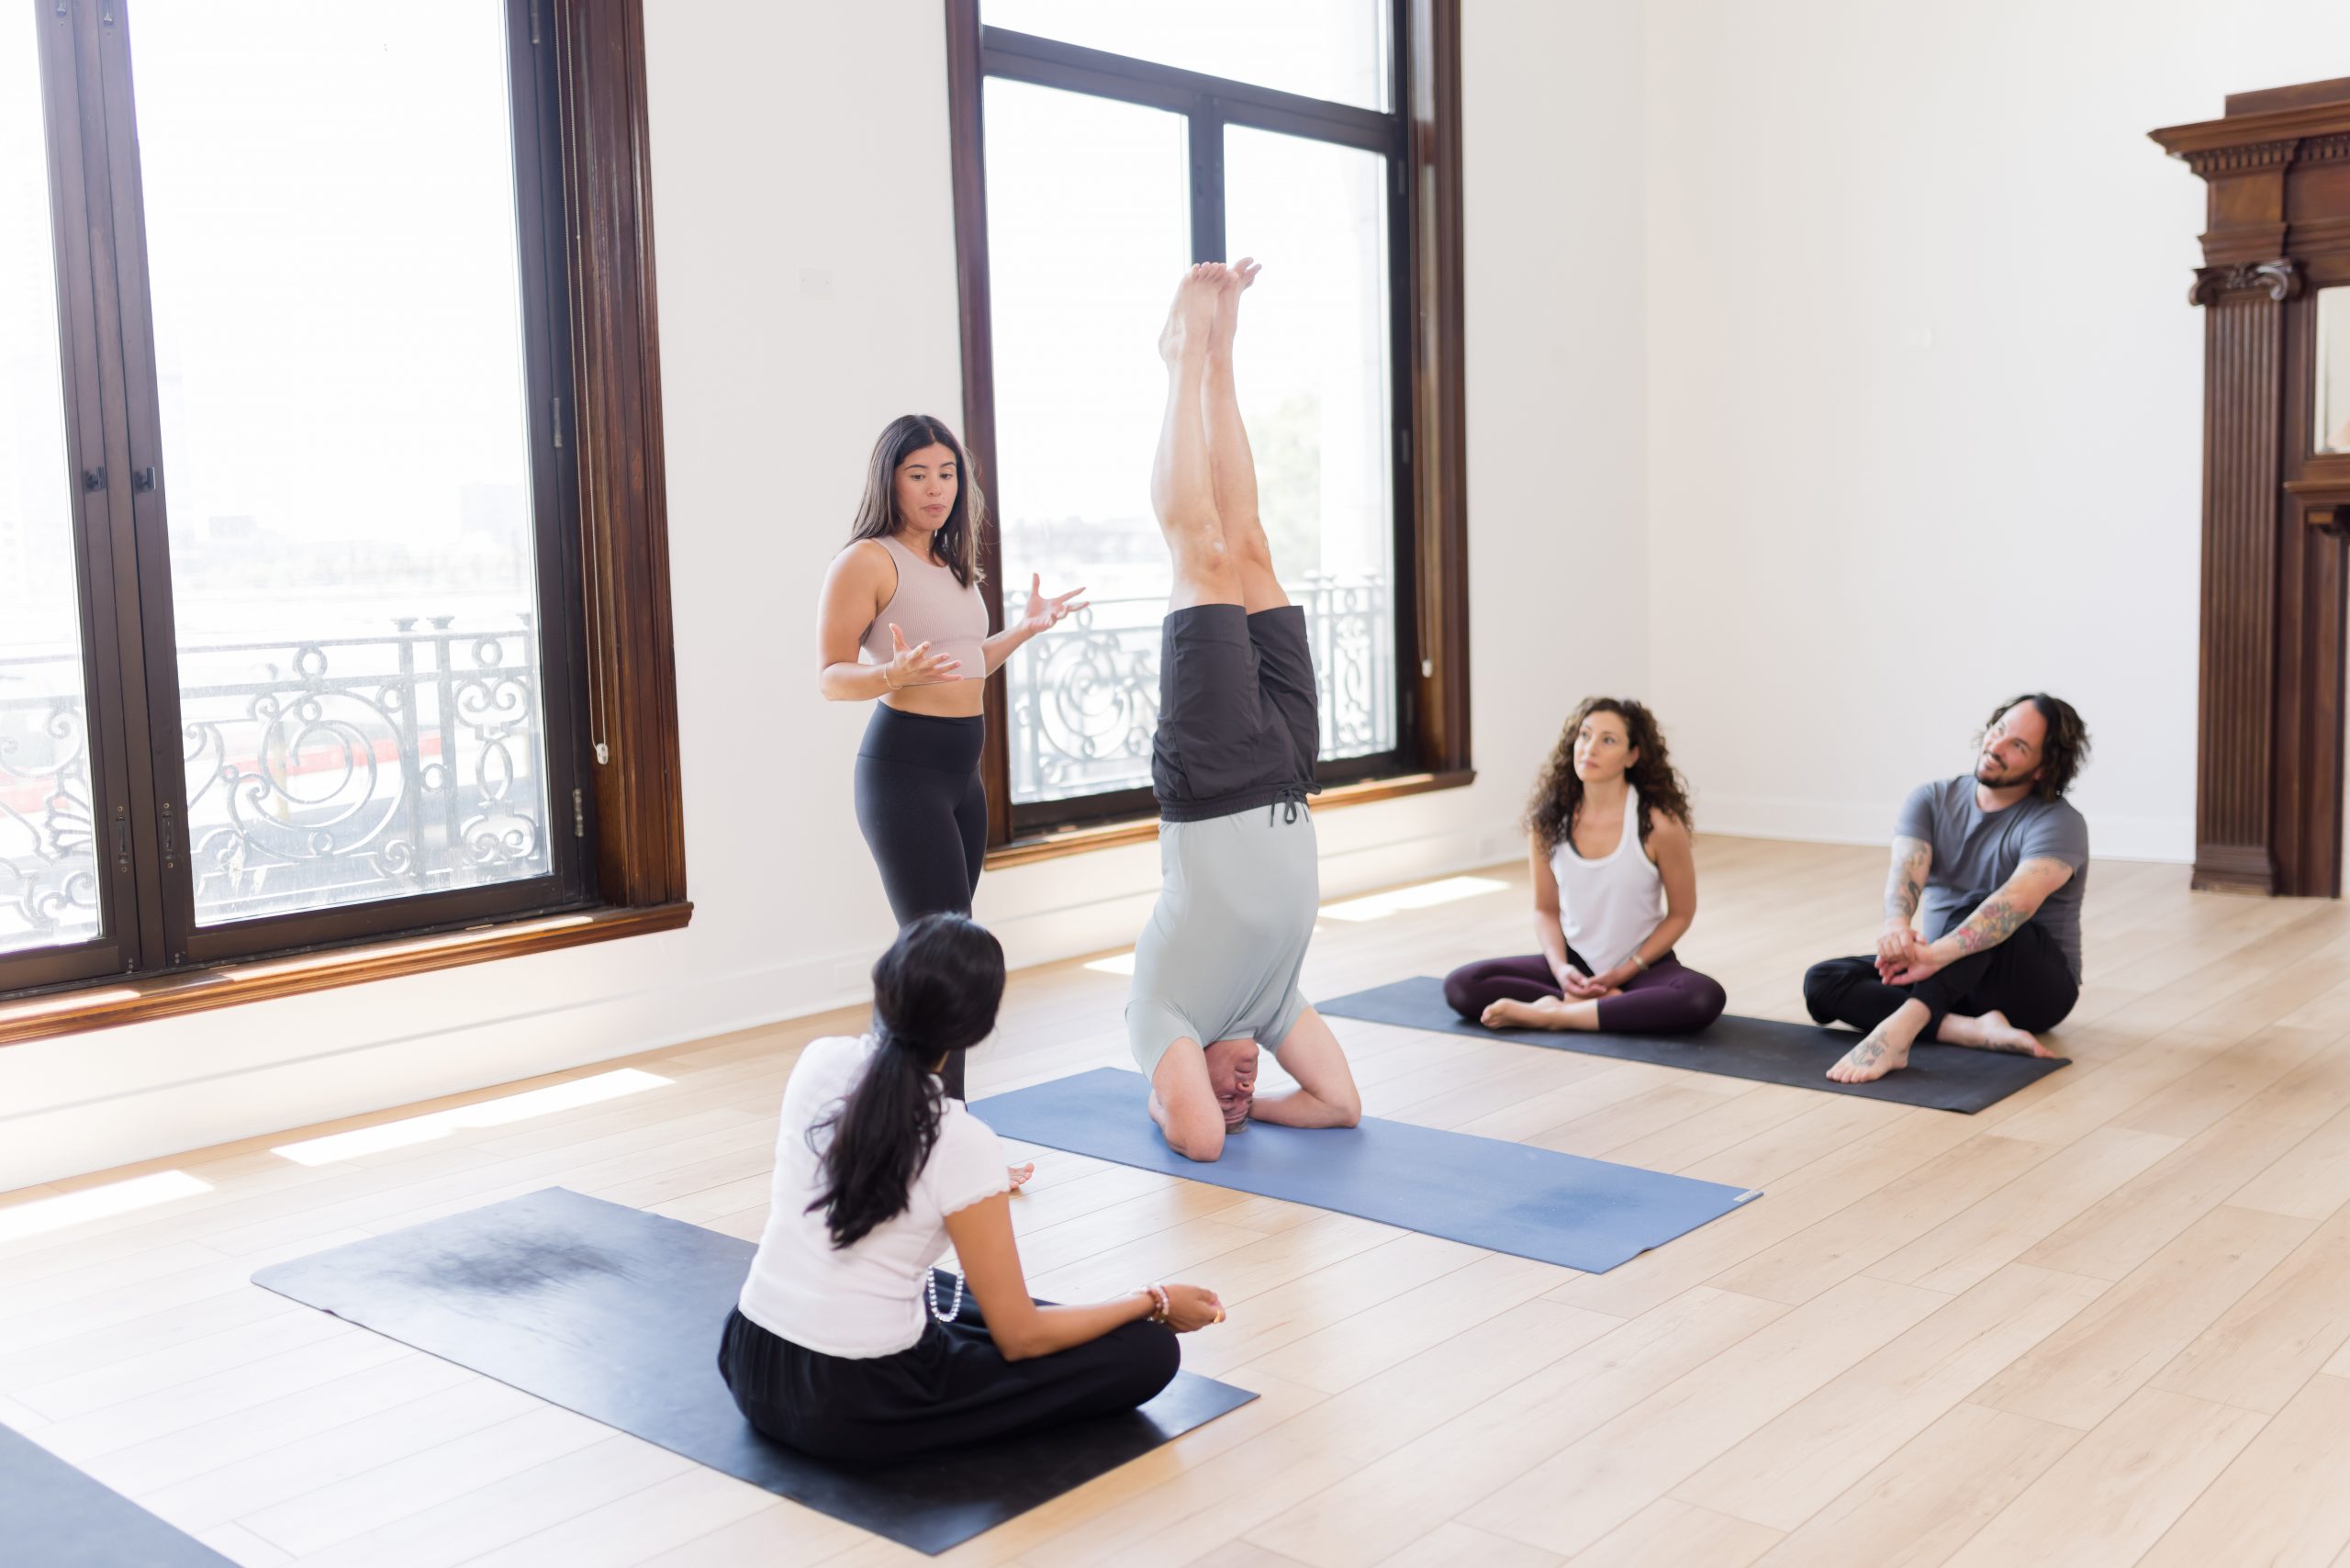 Fact check: Yoga as we know it was invented less than 100 years ago